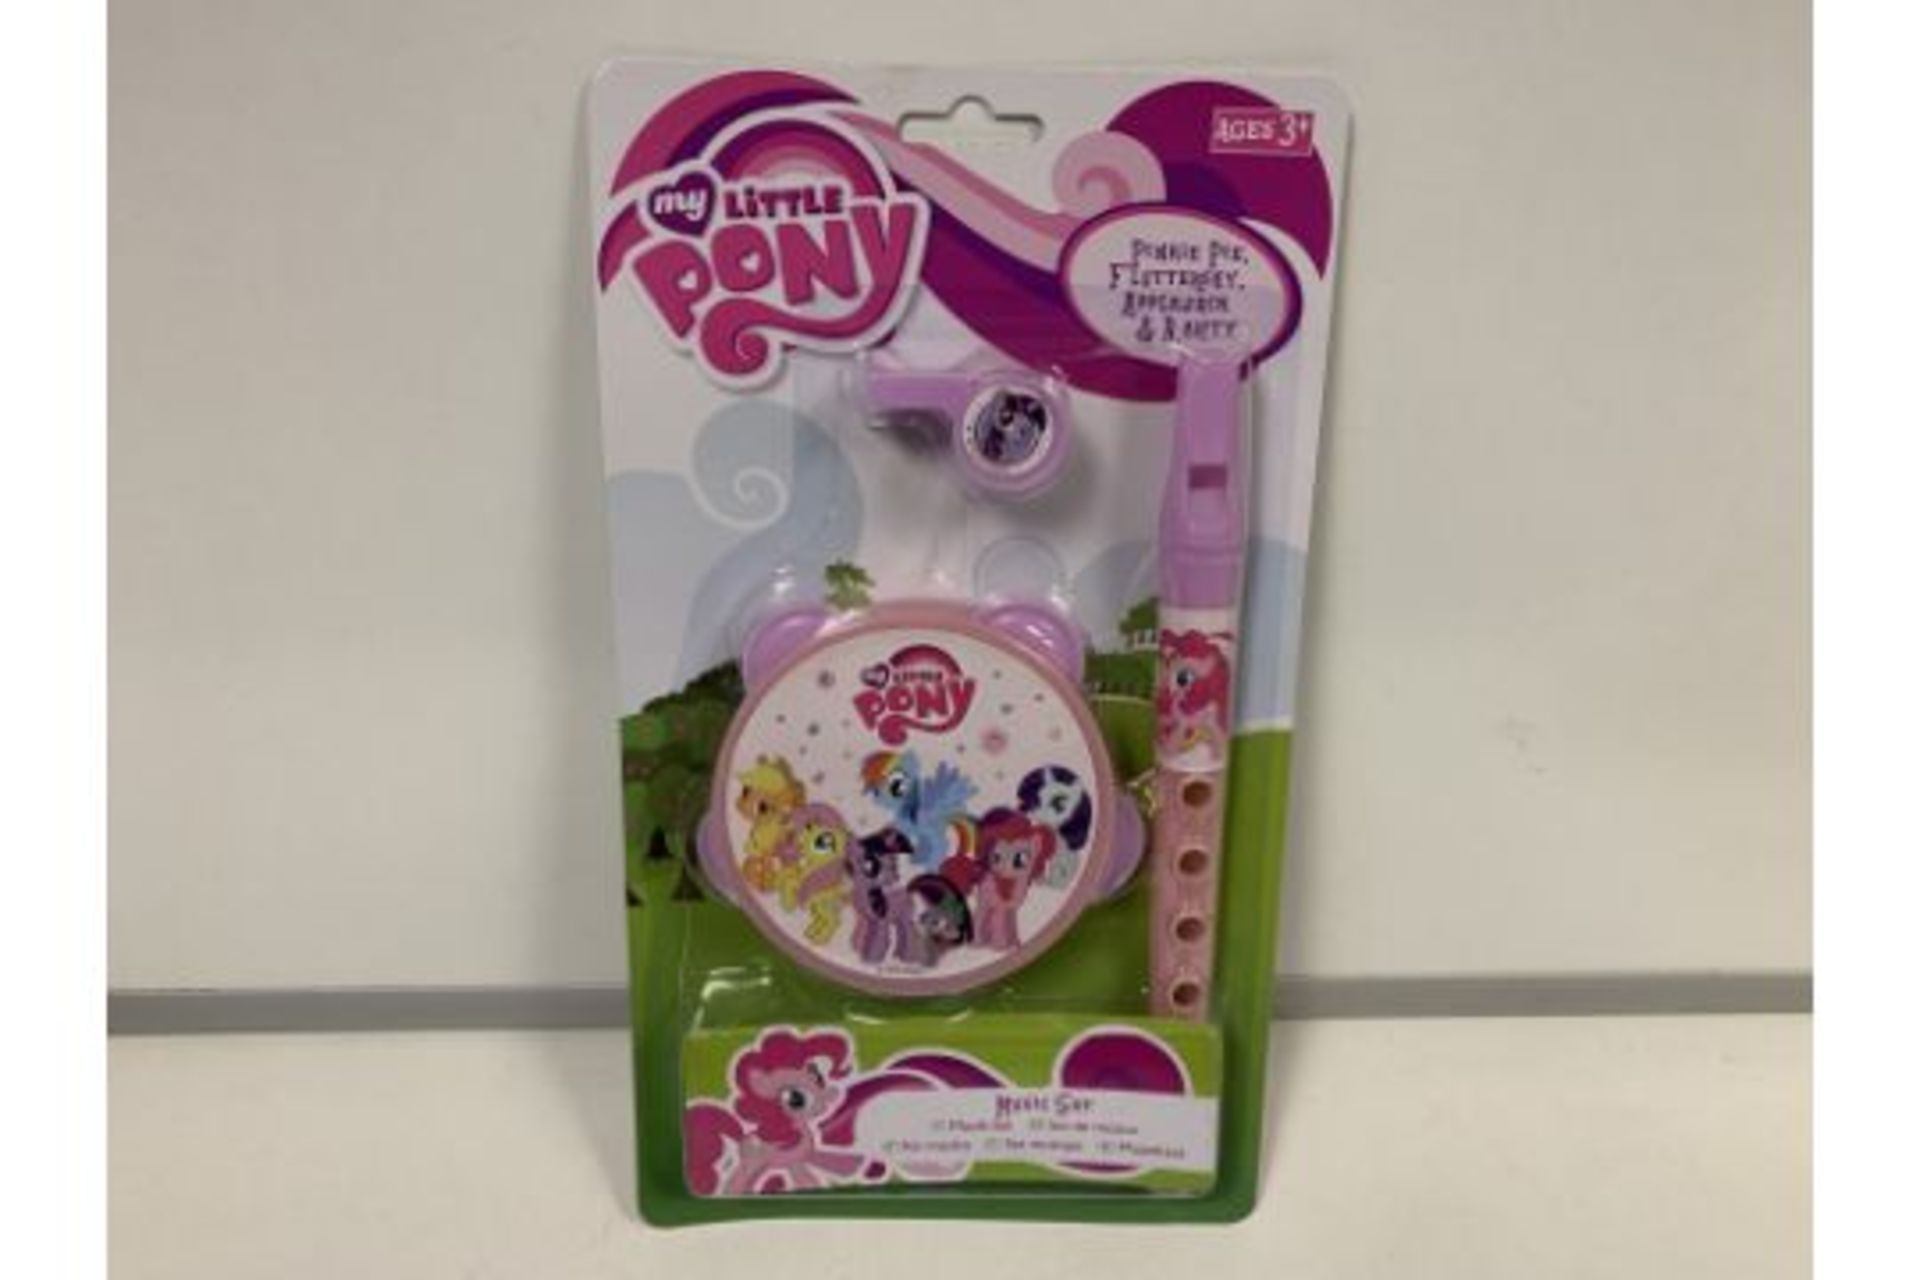 72 X MY LITTLE PONY 3 PIECE MUSICAL SETS IN 6 BOXES